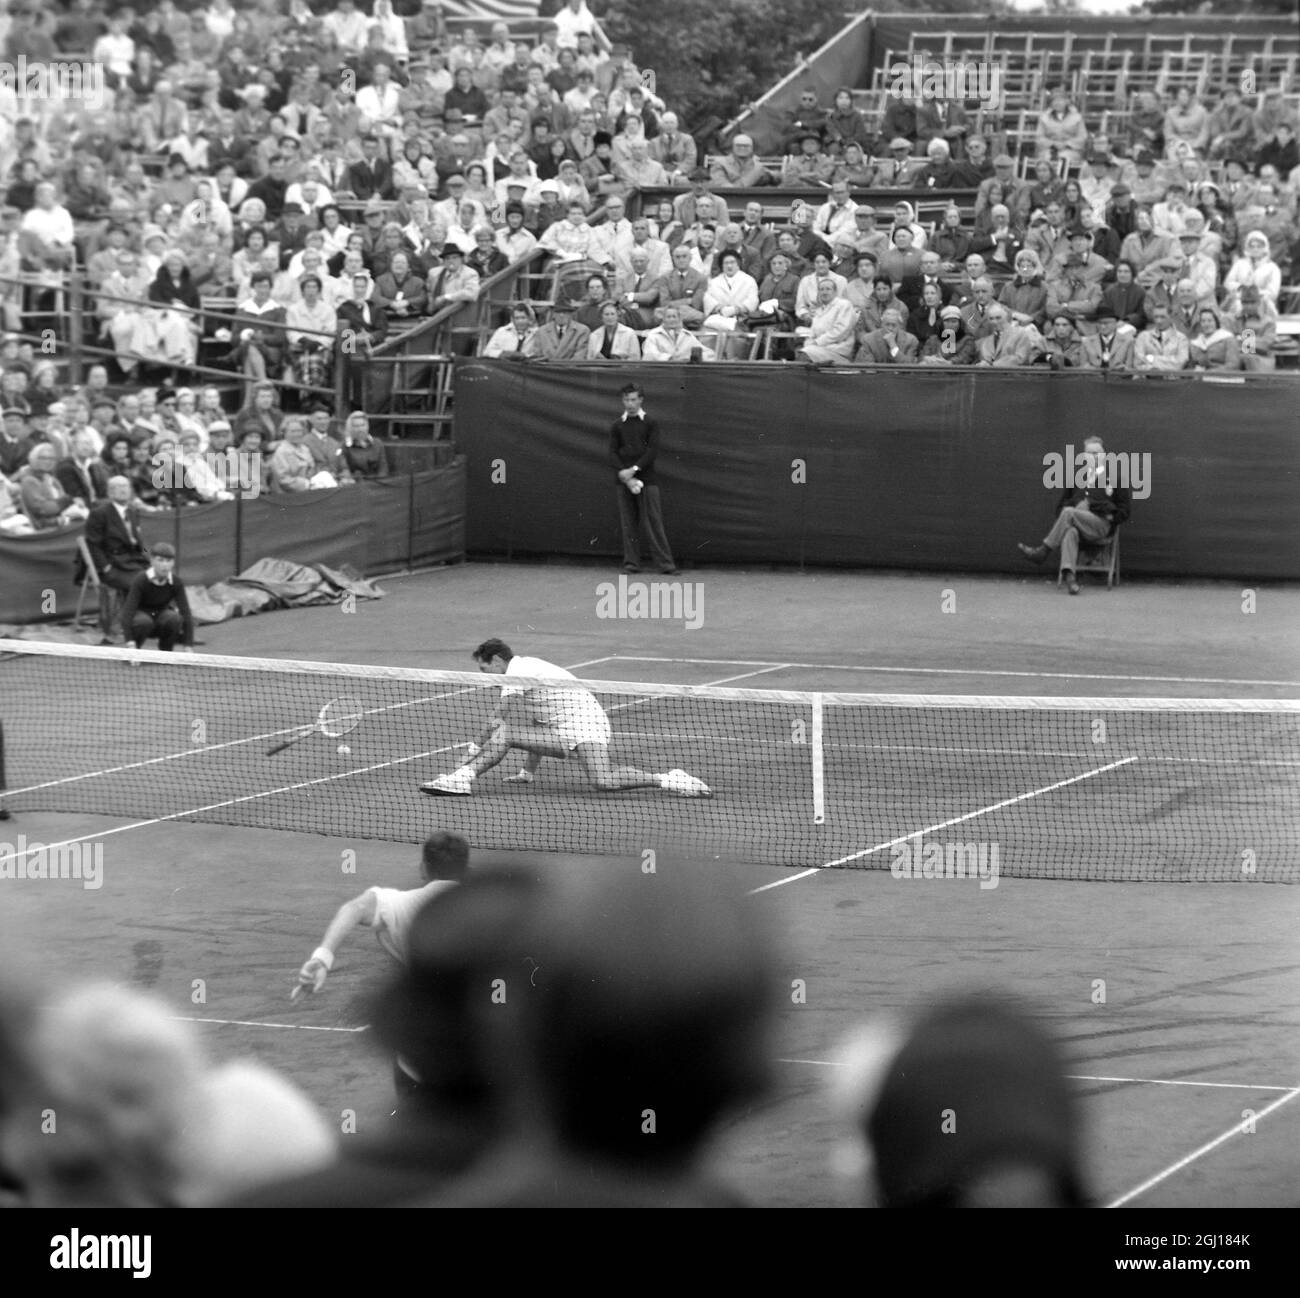 TENNIS DAVIS CUP INTER ZONE HALBFINALE MIKE SANGSTER IN AKTION IN BOURNMOUTH - ; 26. SEPTEMBER 1963 Stockfoto